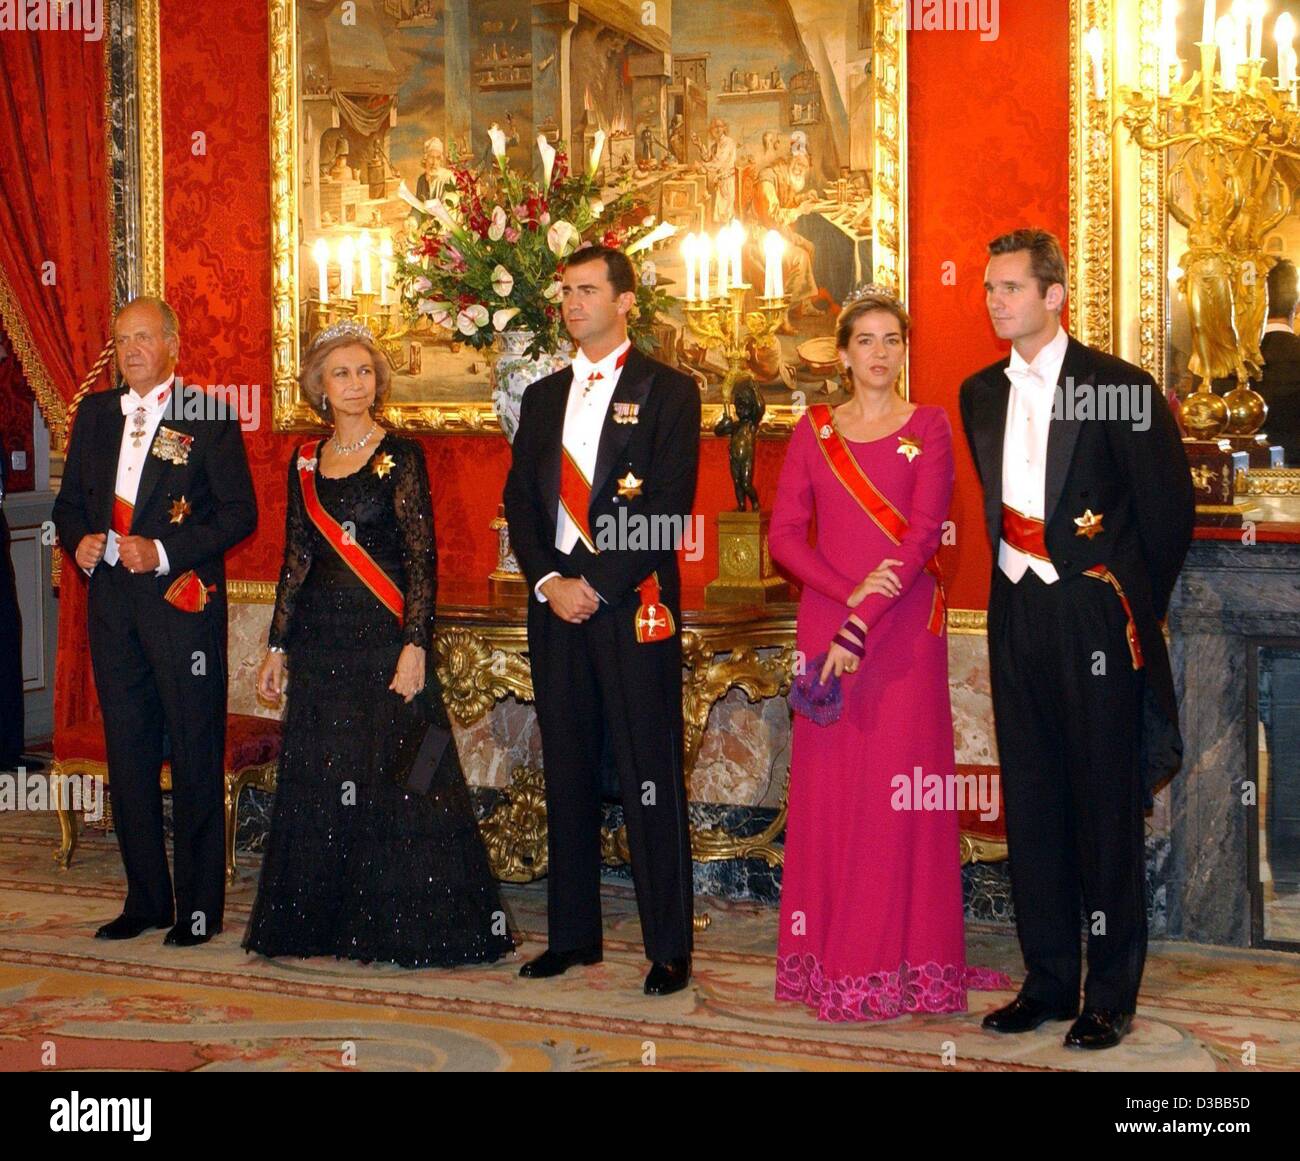 (dpa) - From L: King Juan Carlos of Spain, Queen Sofia, Crown Prince Felipe, Princess Cristina and her husband Inaki Urdangarin pose ahead of a gala dinner for the German President in the royal palace in Madrid, 11 November 2002. The German president was on a three-day state visit to Spain and the h Stock Photo